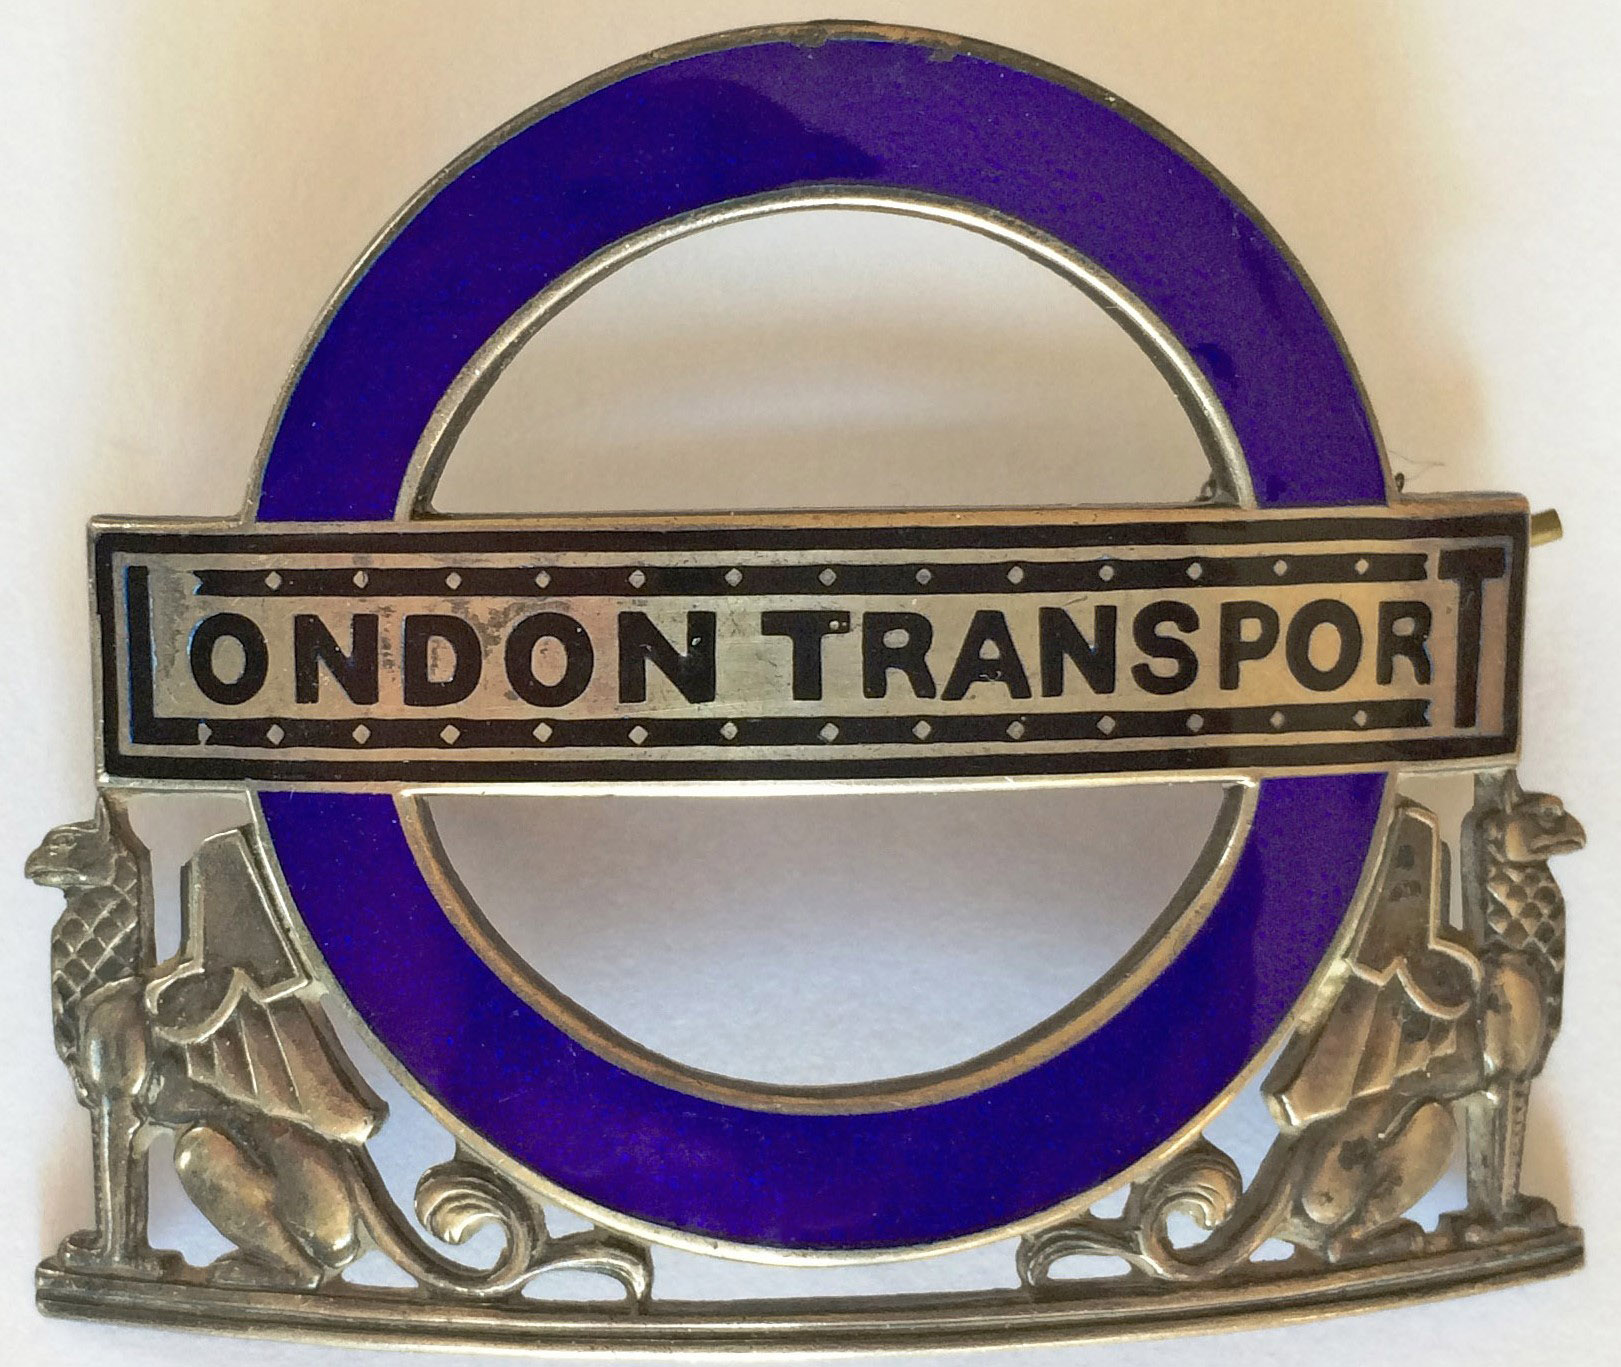 London Transport Bus Inspector's hallmarked silver CAP BADGE of the first type, with a navy blue